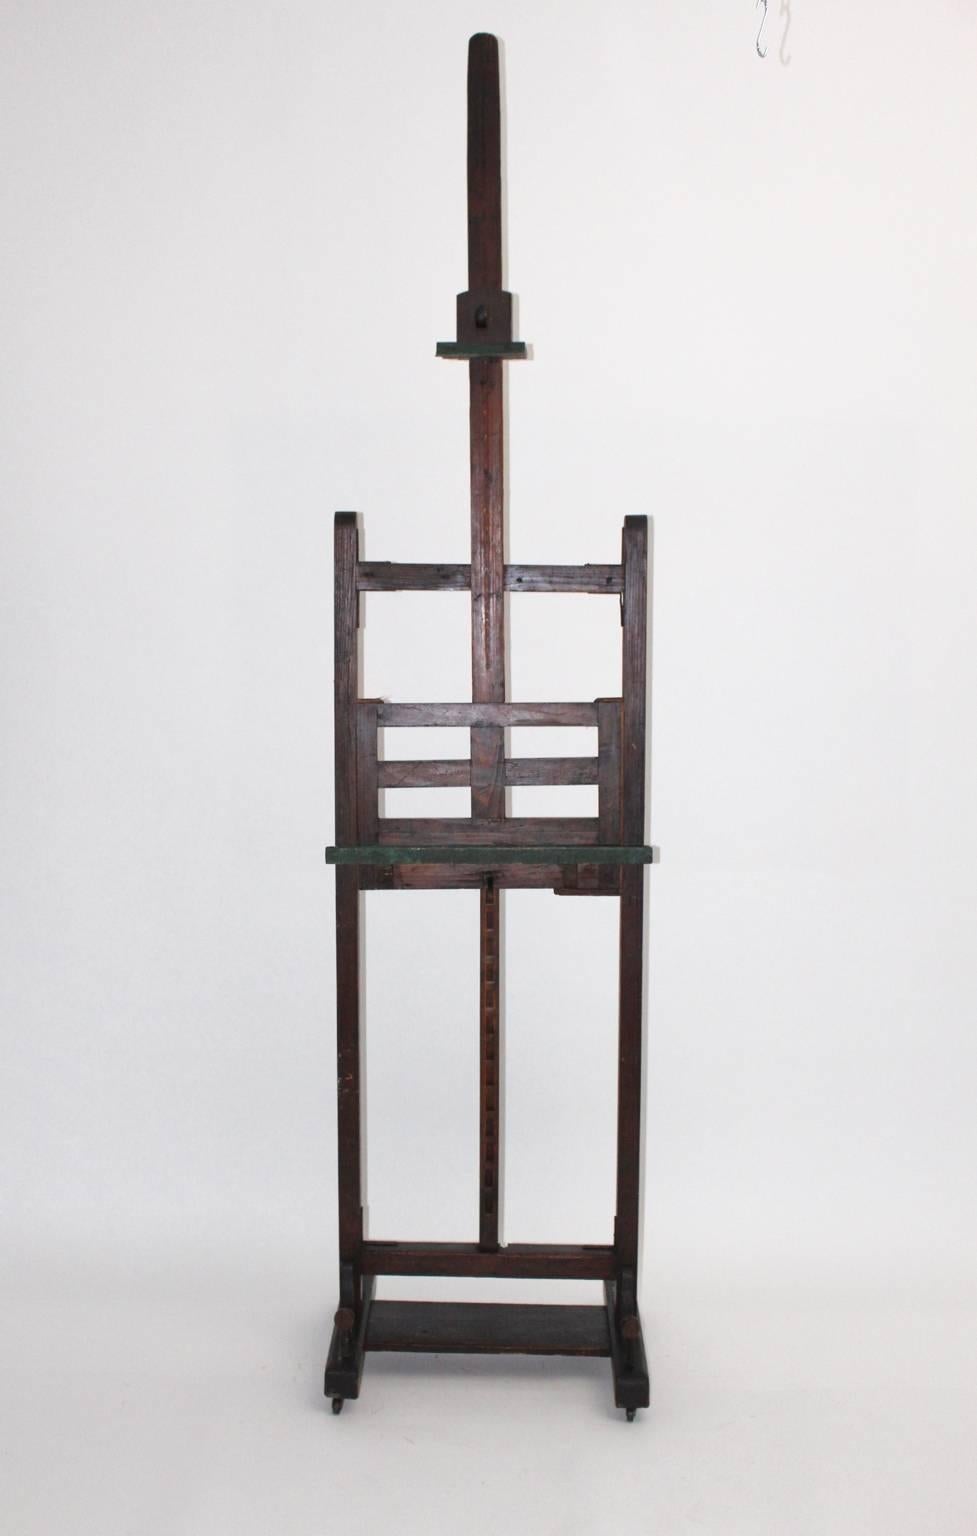 Very decorative Art Deco Easel from an Austrian painter.

Spruce wood brown stained.
Original condition, beautiful patina with color rests.

Adjustable from up to down from 72.83 in to 98.42 in.
Suitable for large paintings. 

